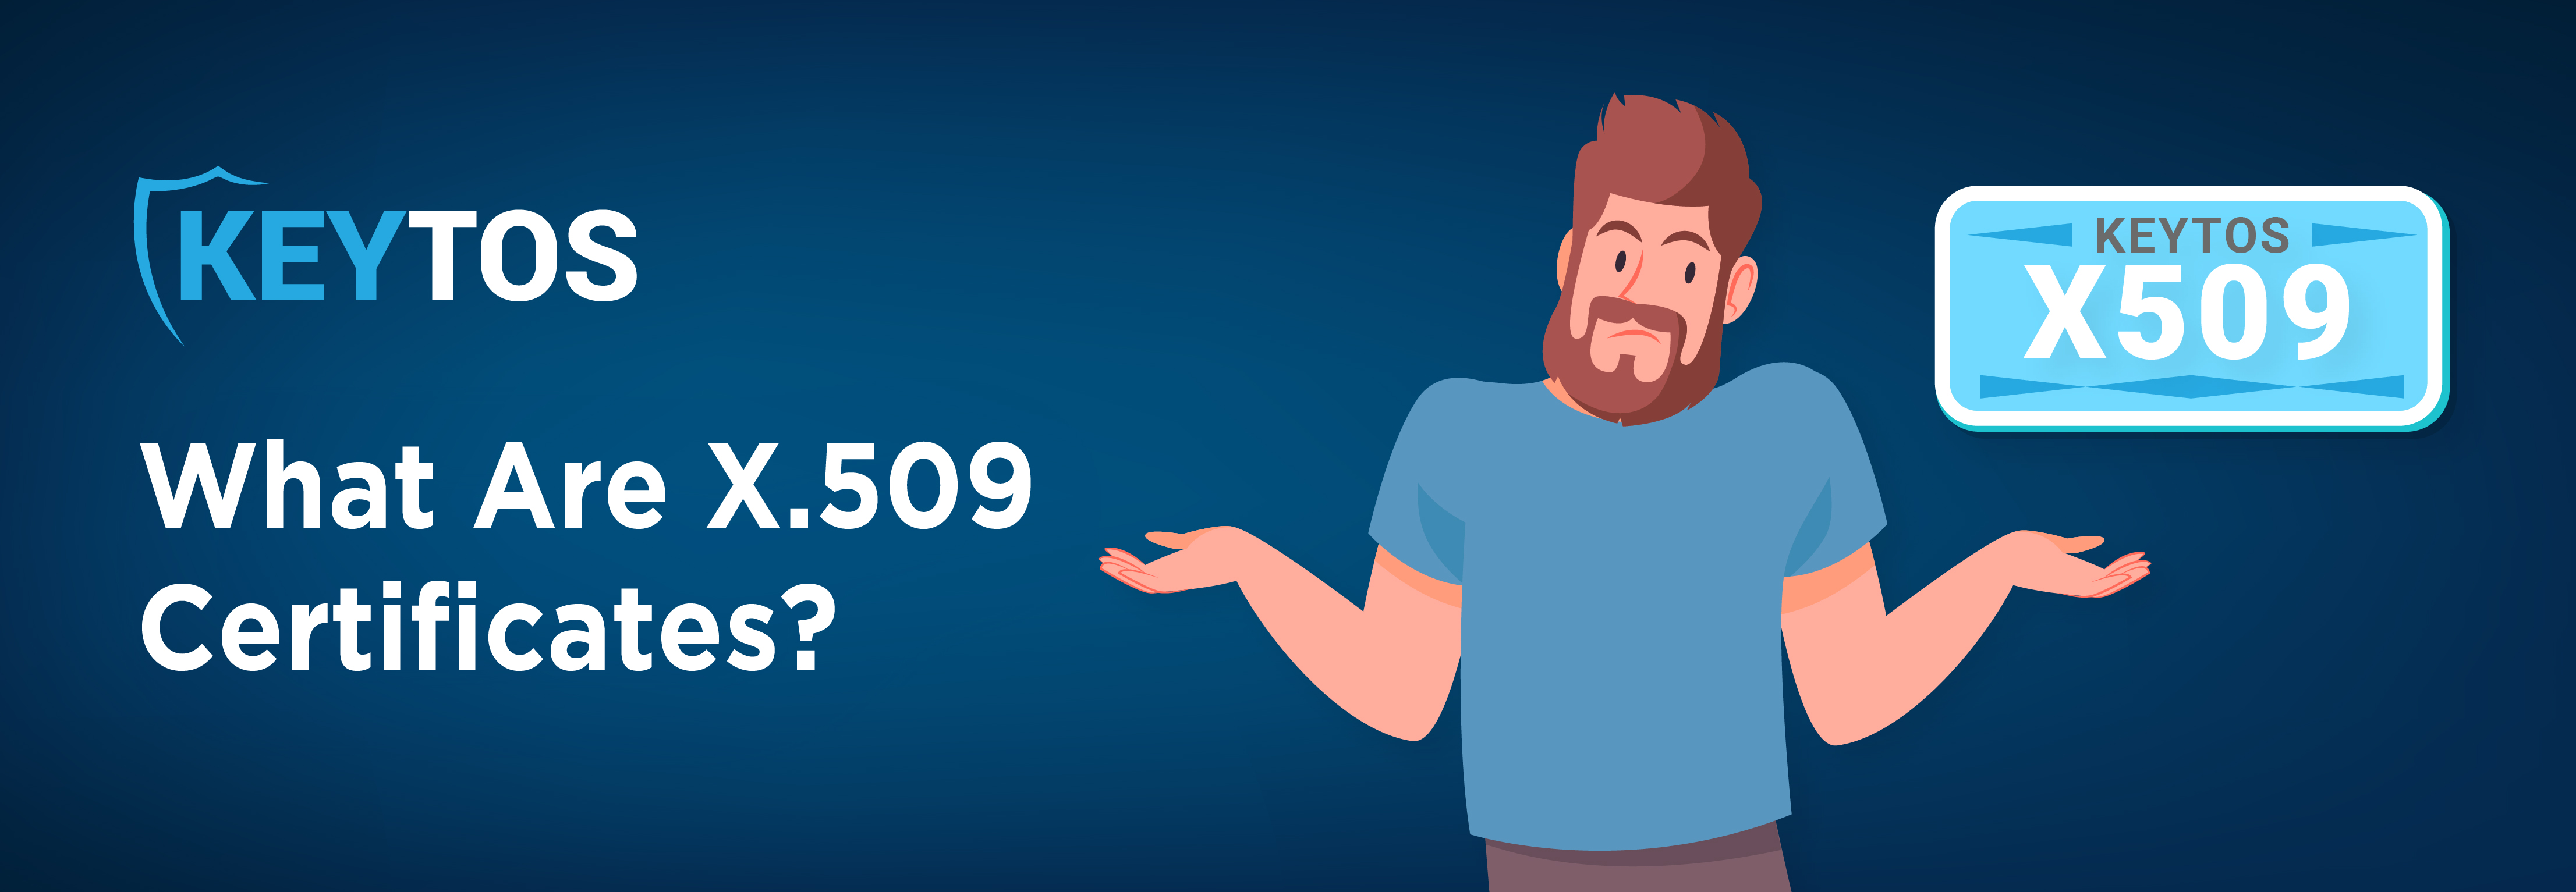 What Are X509 Certificates?